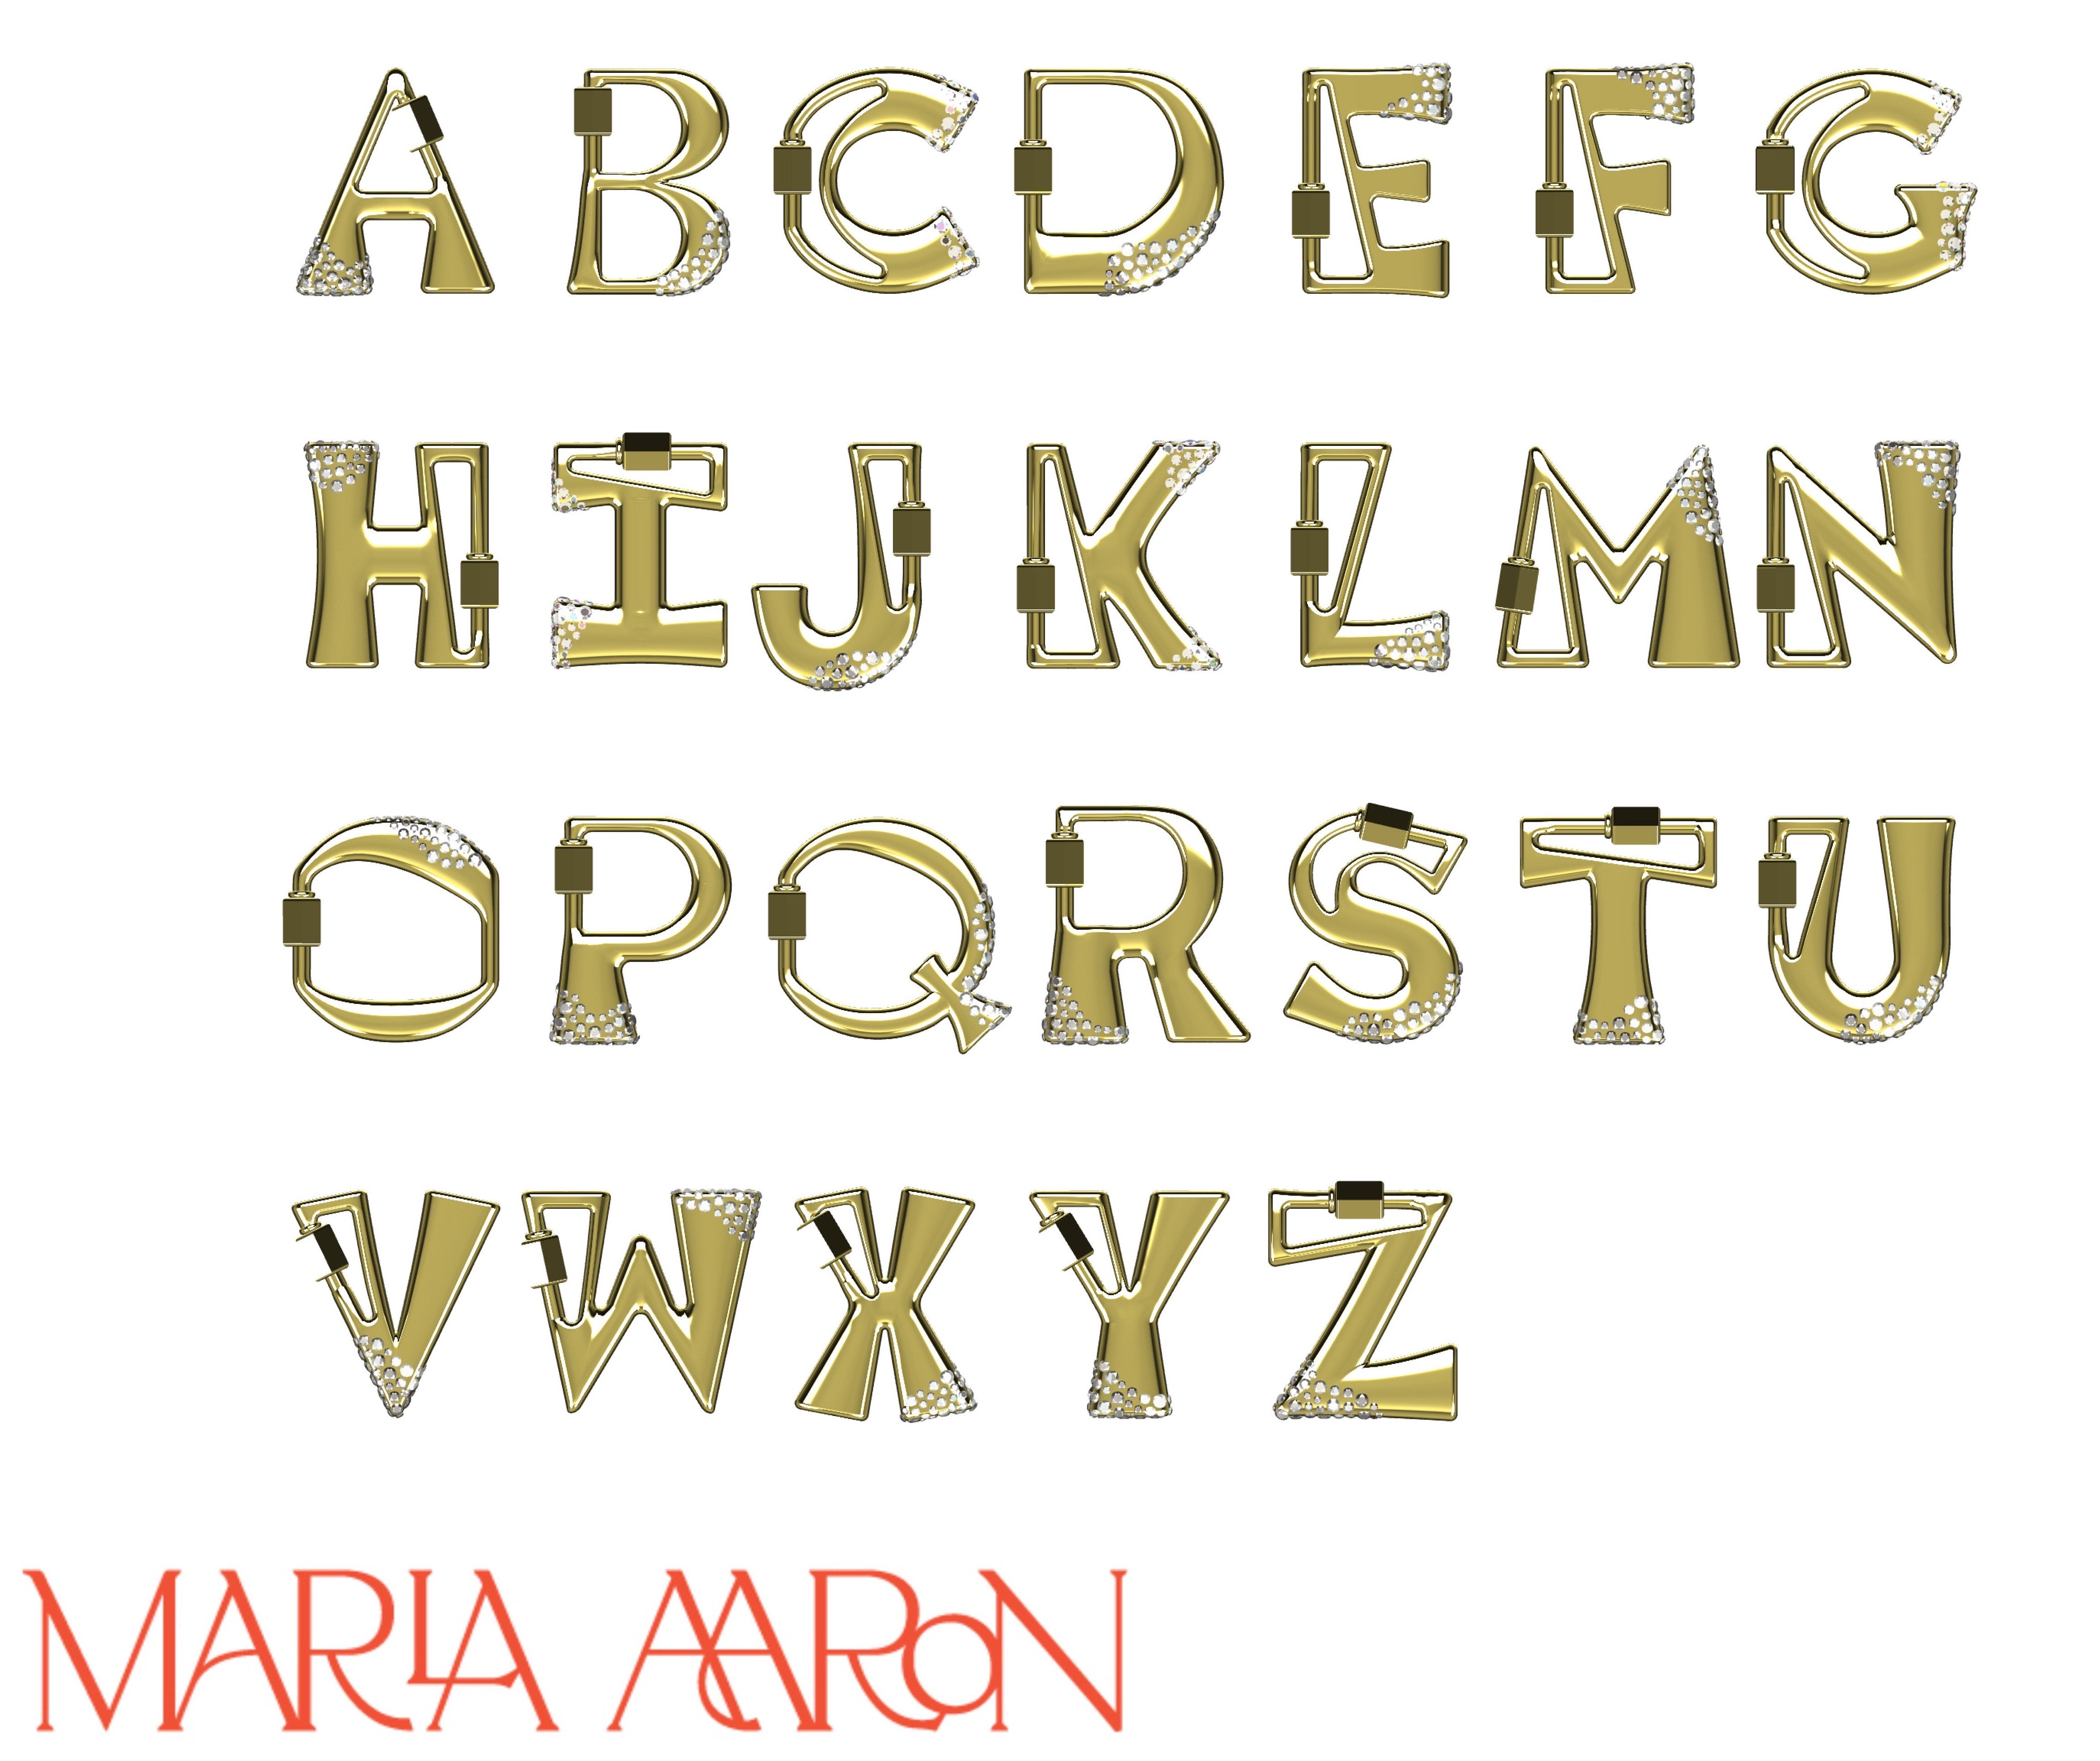 Gold locks of every letter of the alphabet including C charm against white backdrop with Marla Aaron logo in bottom left corner